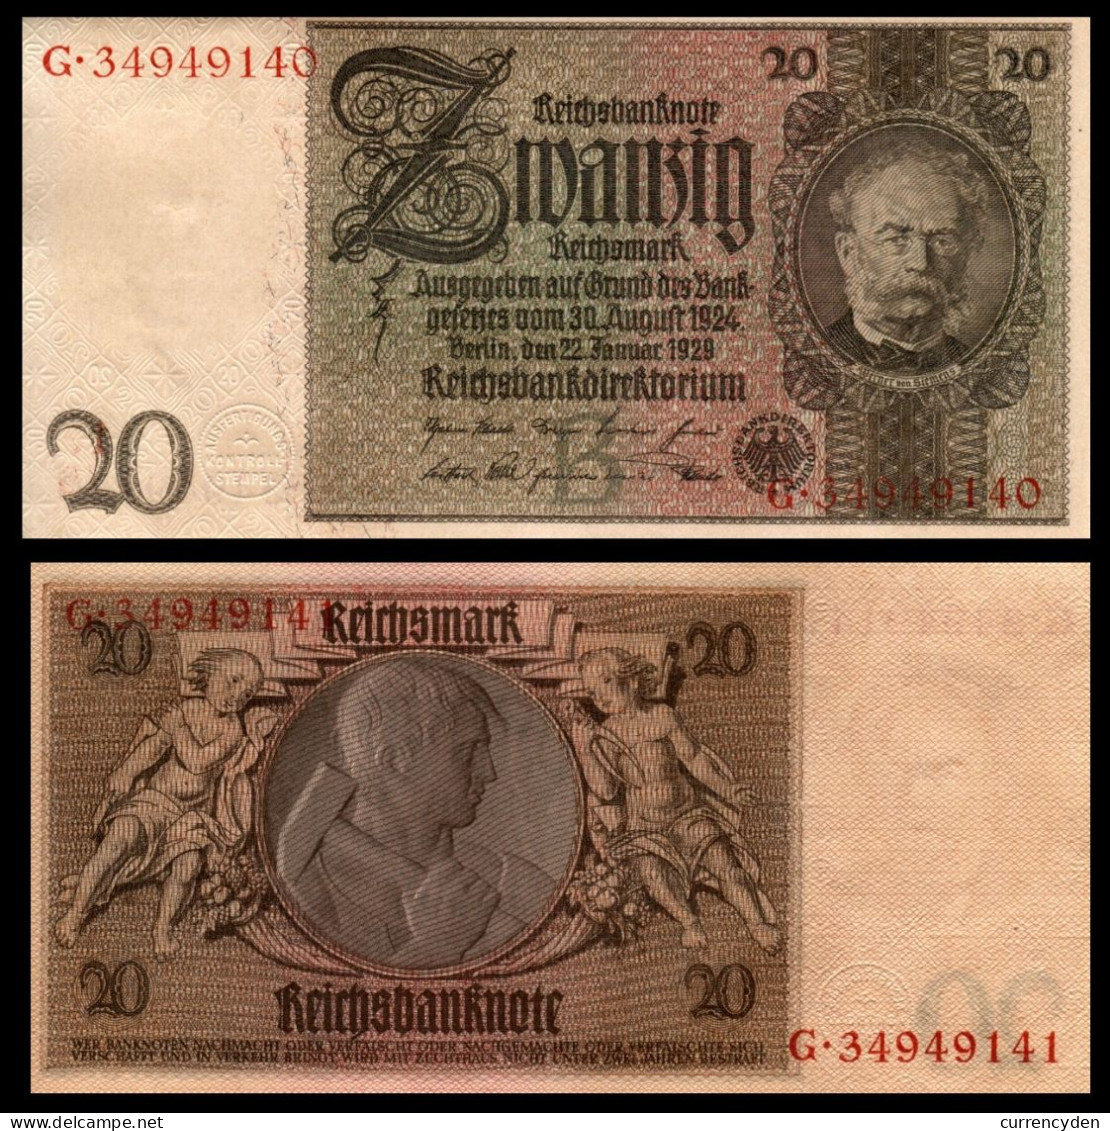 Germany P181, 20 Reichsmark 1929 XF/AU, Consecutive Numbers - 1 Million Mark